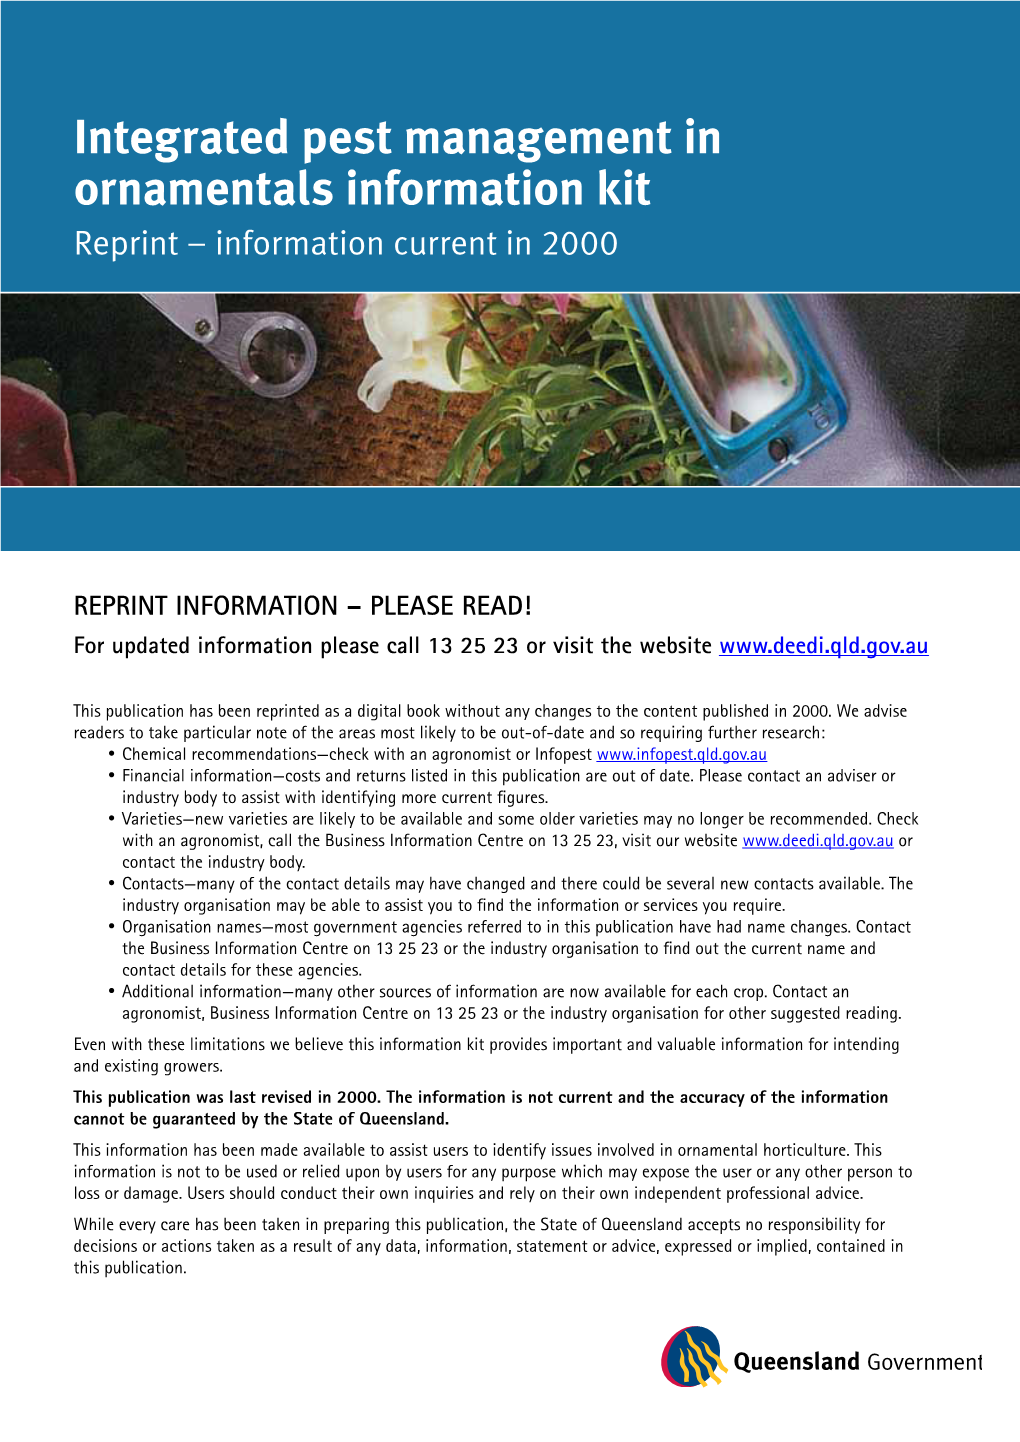 Integrated Pest Management in Ornamentals Information Kit Reprint – Information Current in 2000